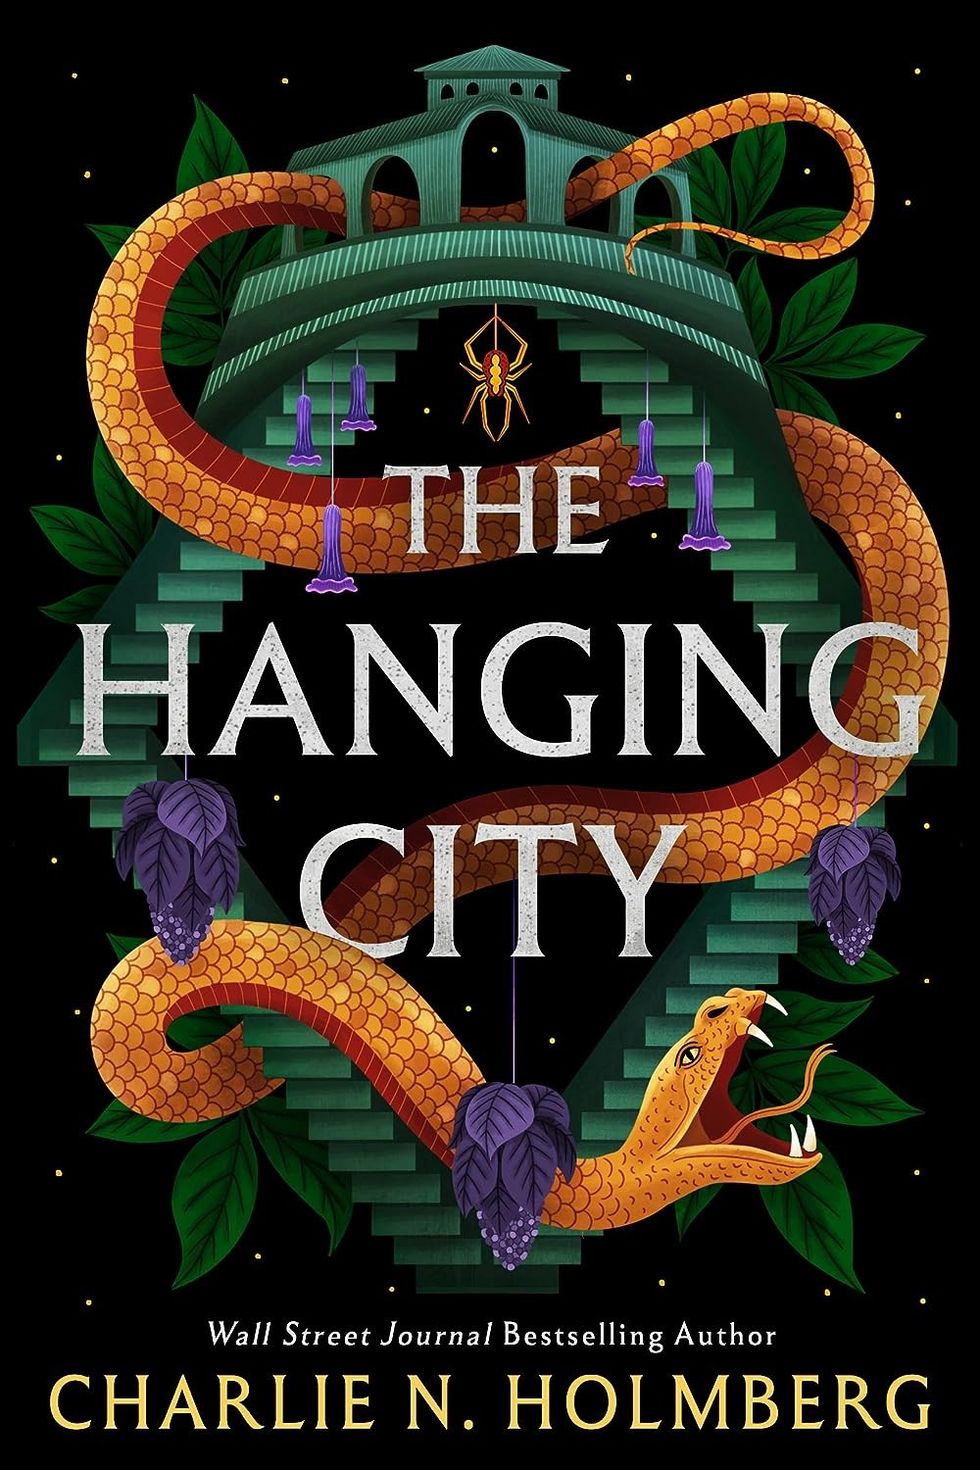 "The Hanging City" by Charlie N. Holmberg